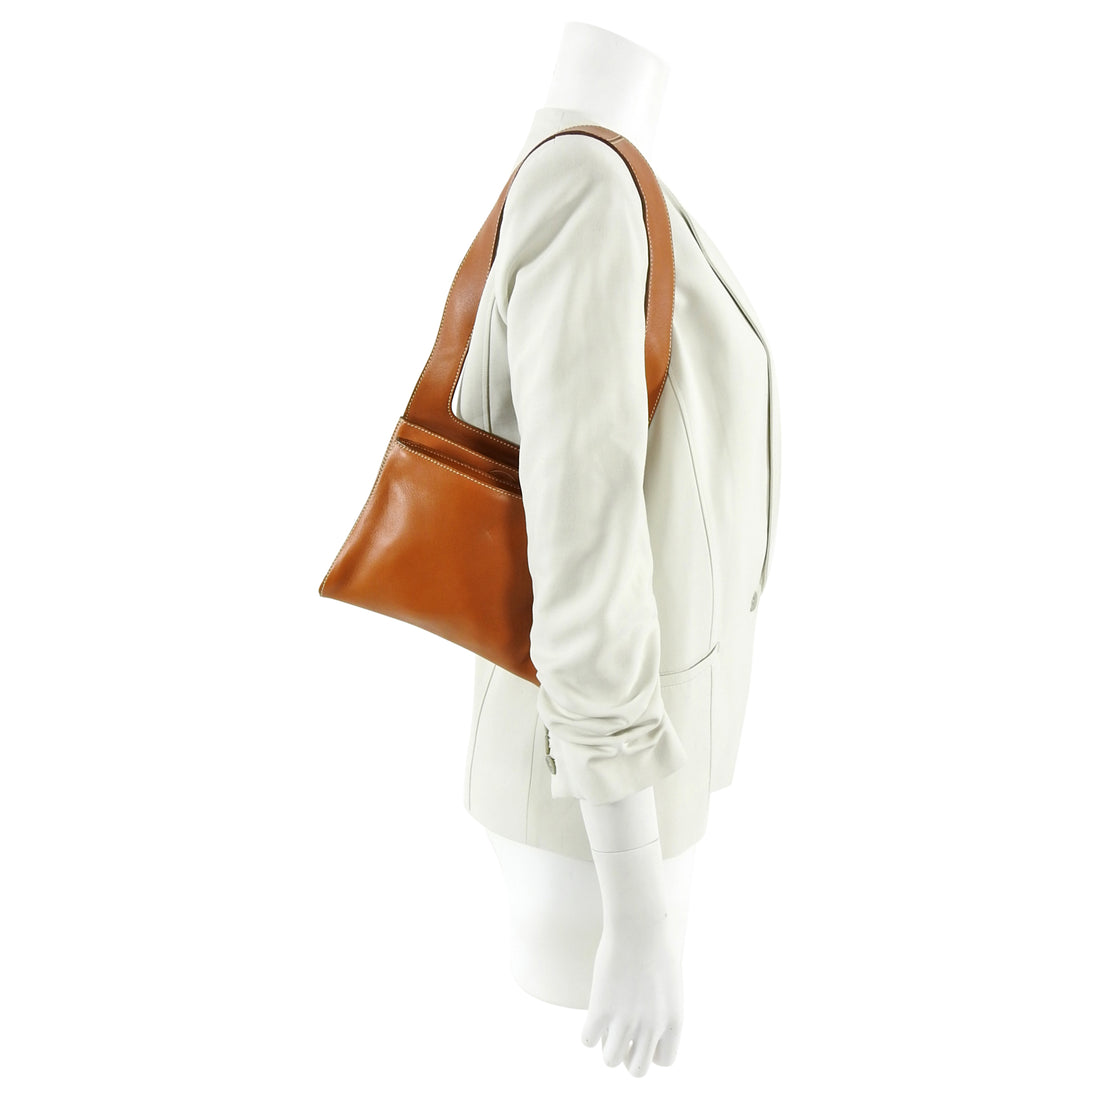 Tods Tan Small Leather Shoulder Bag